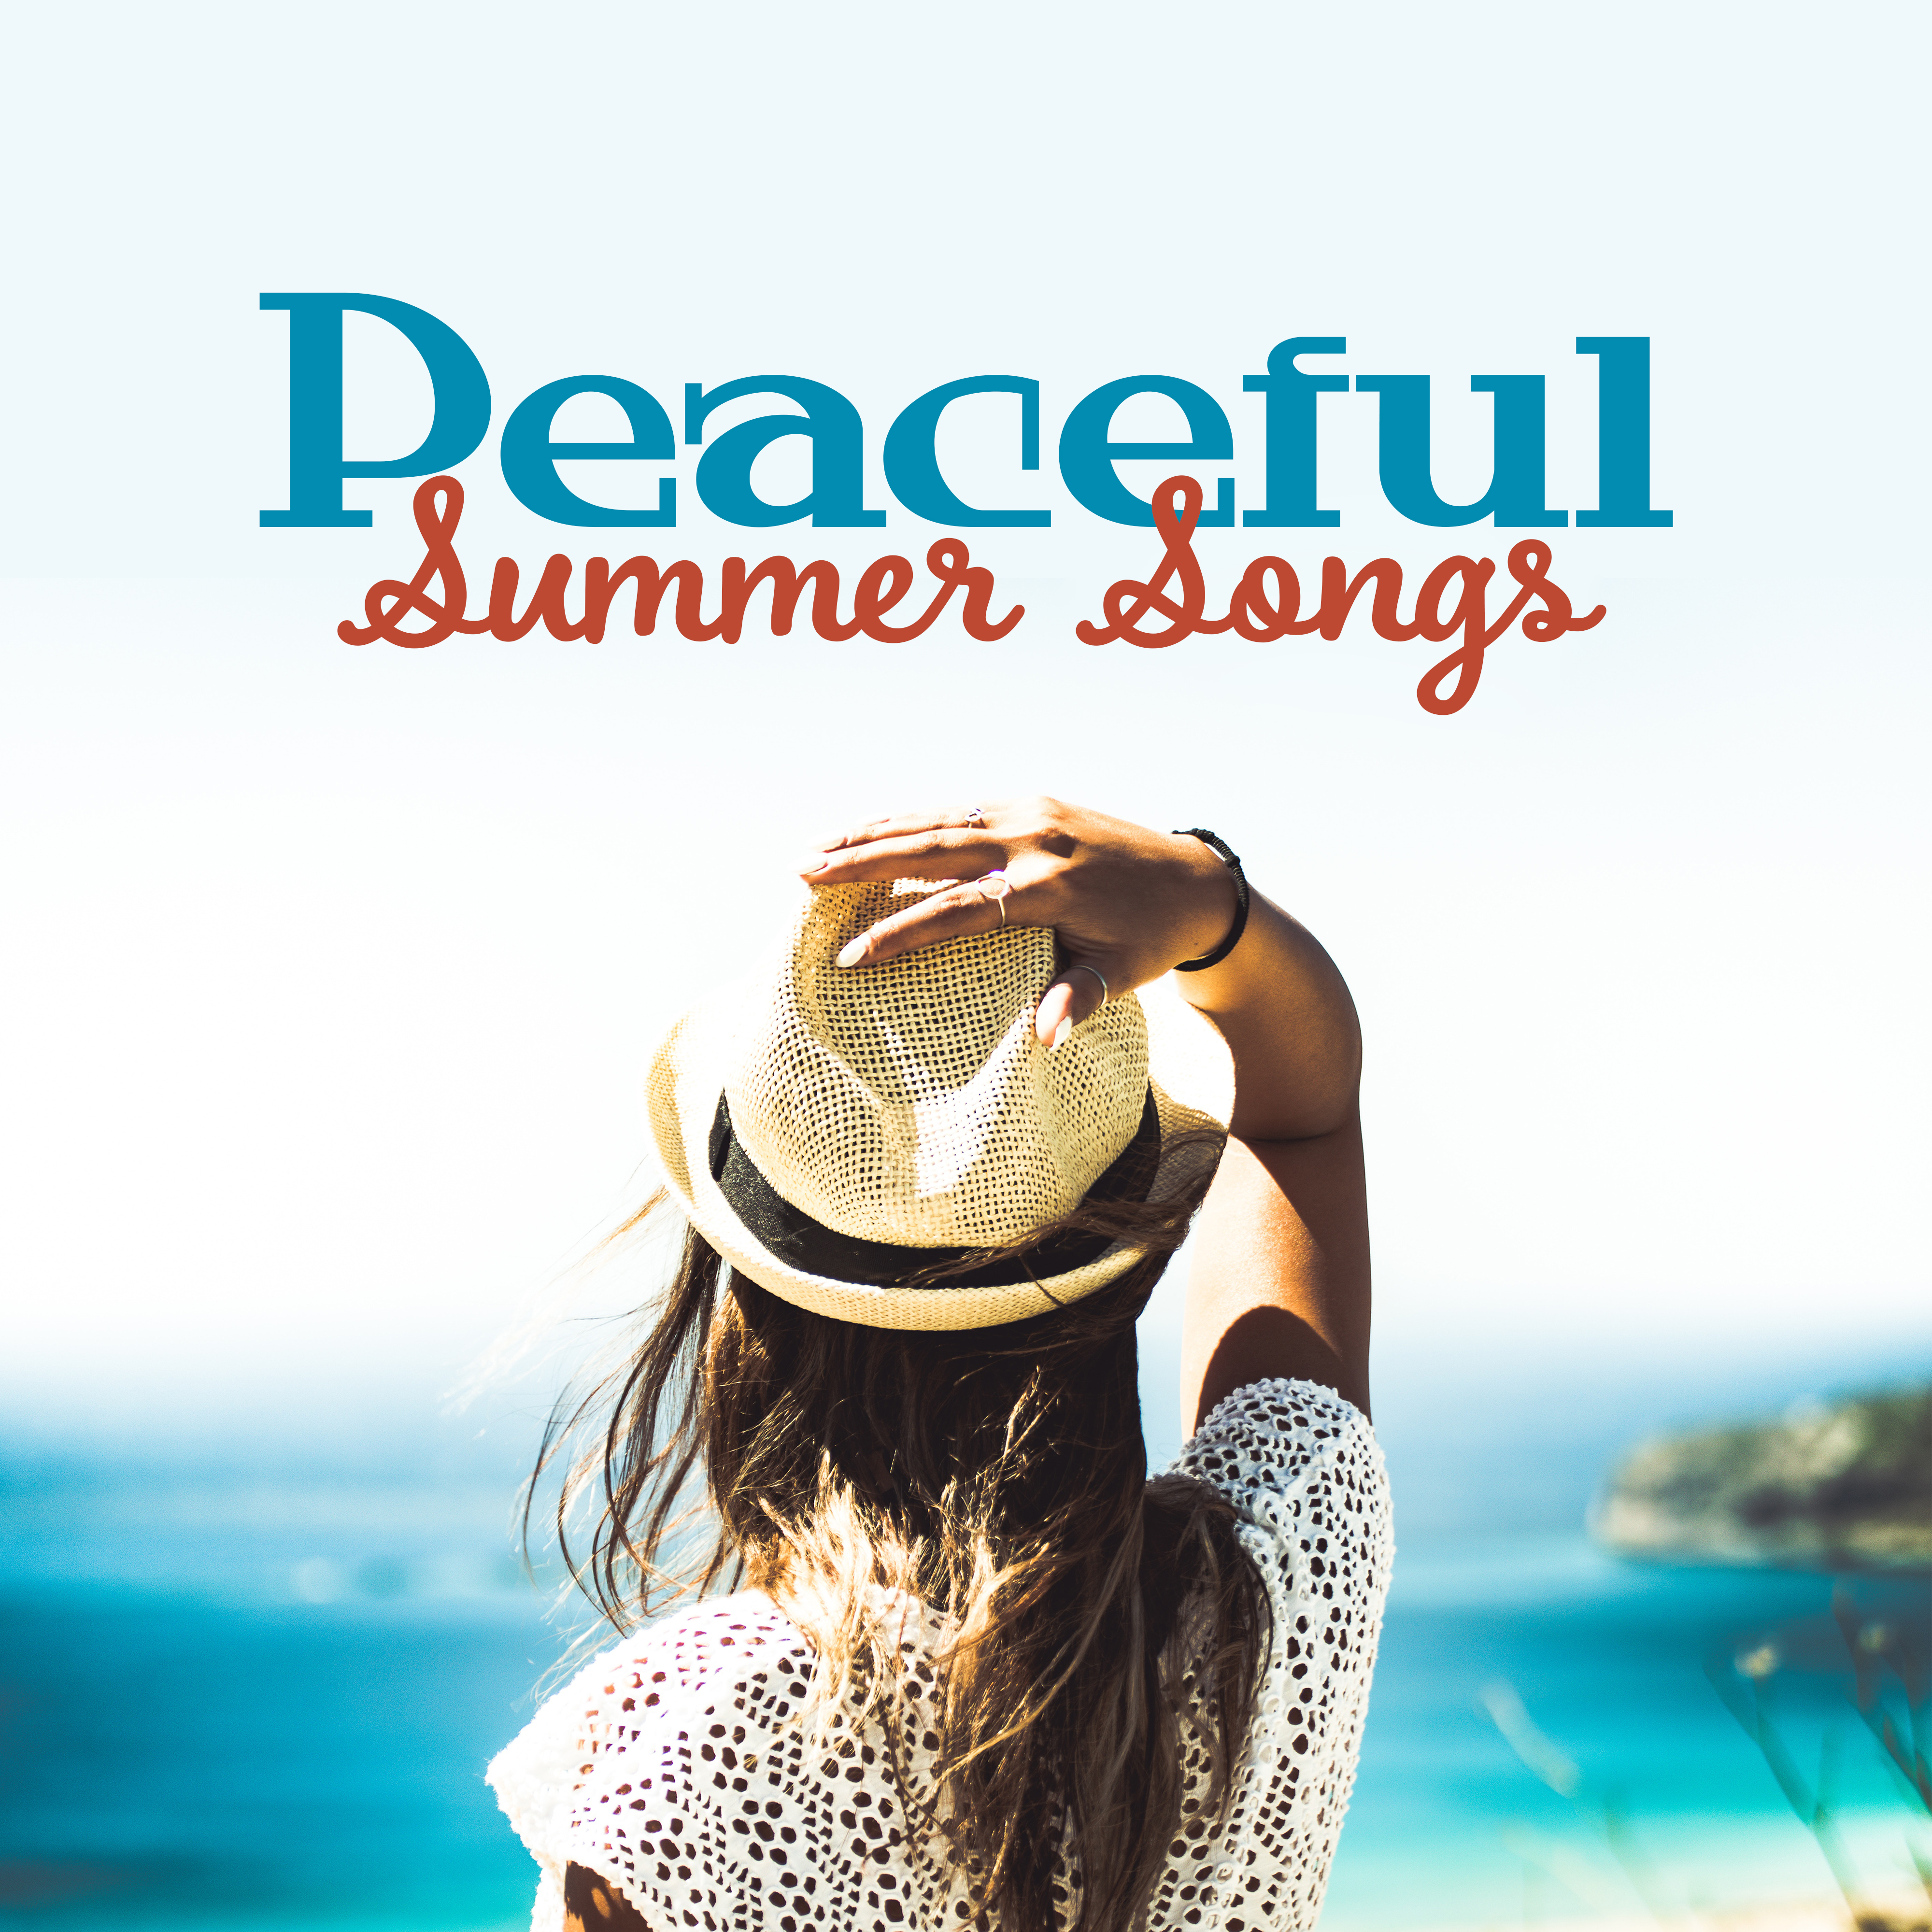 Peaceful Summer Songs – Easy Listening, Beach Melodies to Relax, Chill Out Lounge, Time to Rest